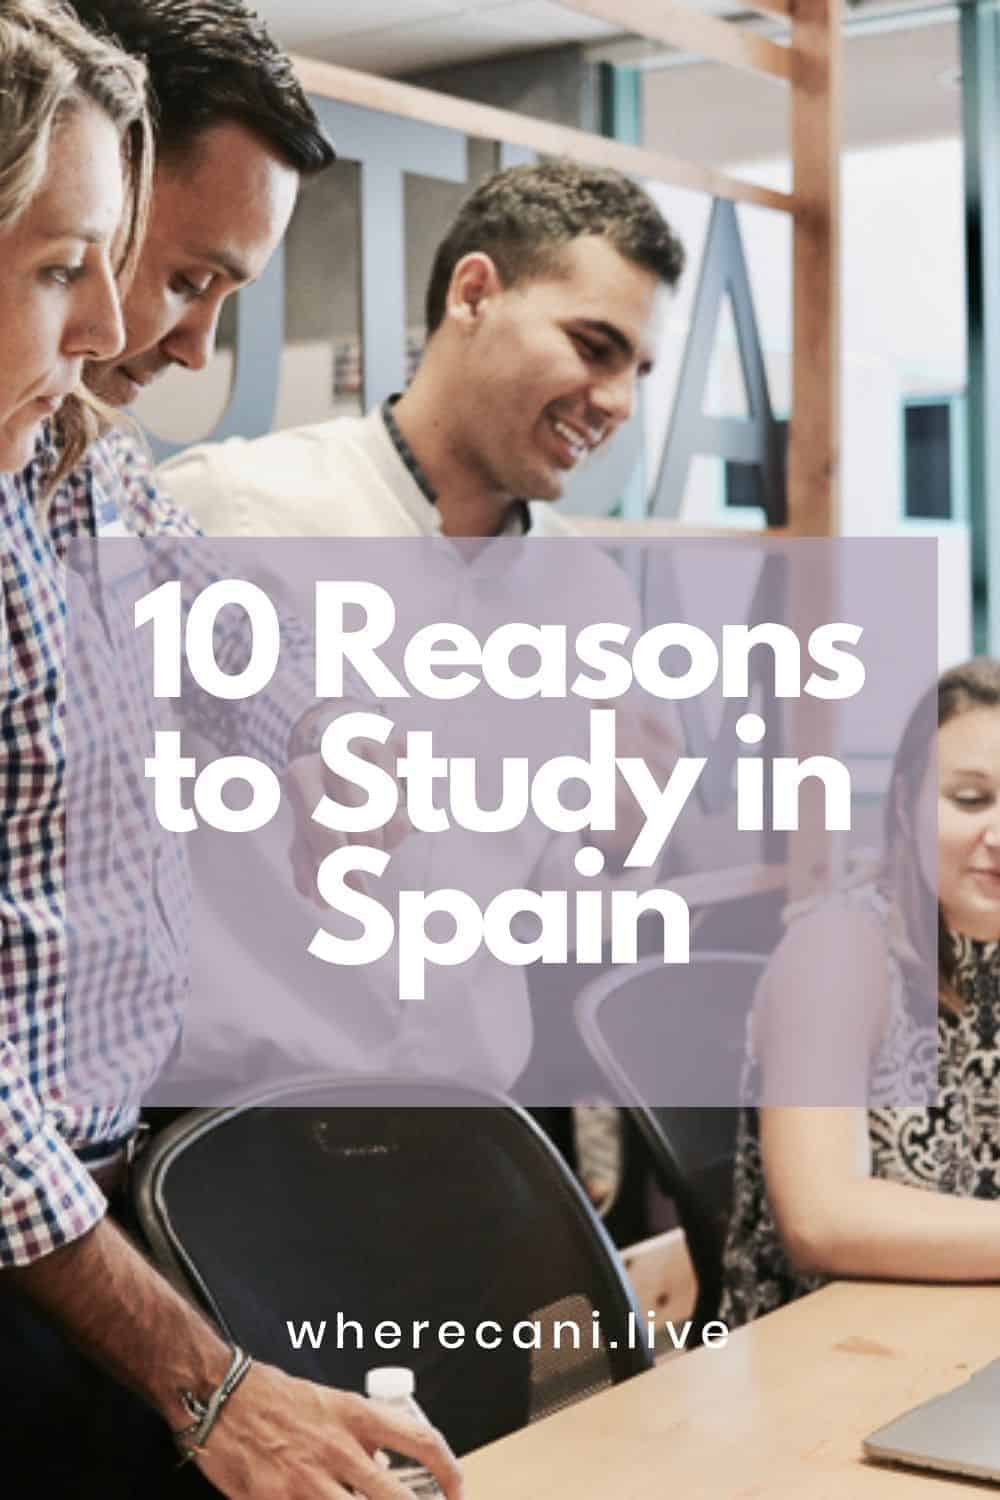 Want to study Abroad?  Well here is 10 reasons to choose Spain.  We also help you with getting a Spain Study Visa. #studyabrad #studyinspain #spain #studyvisa via @wherecanilive